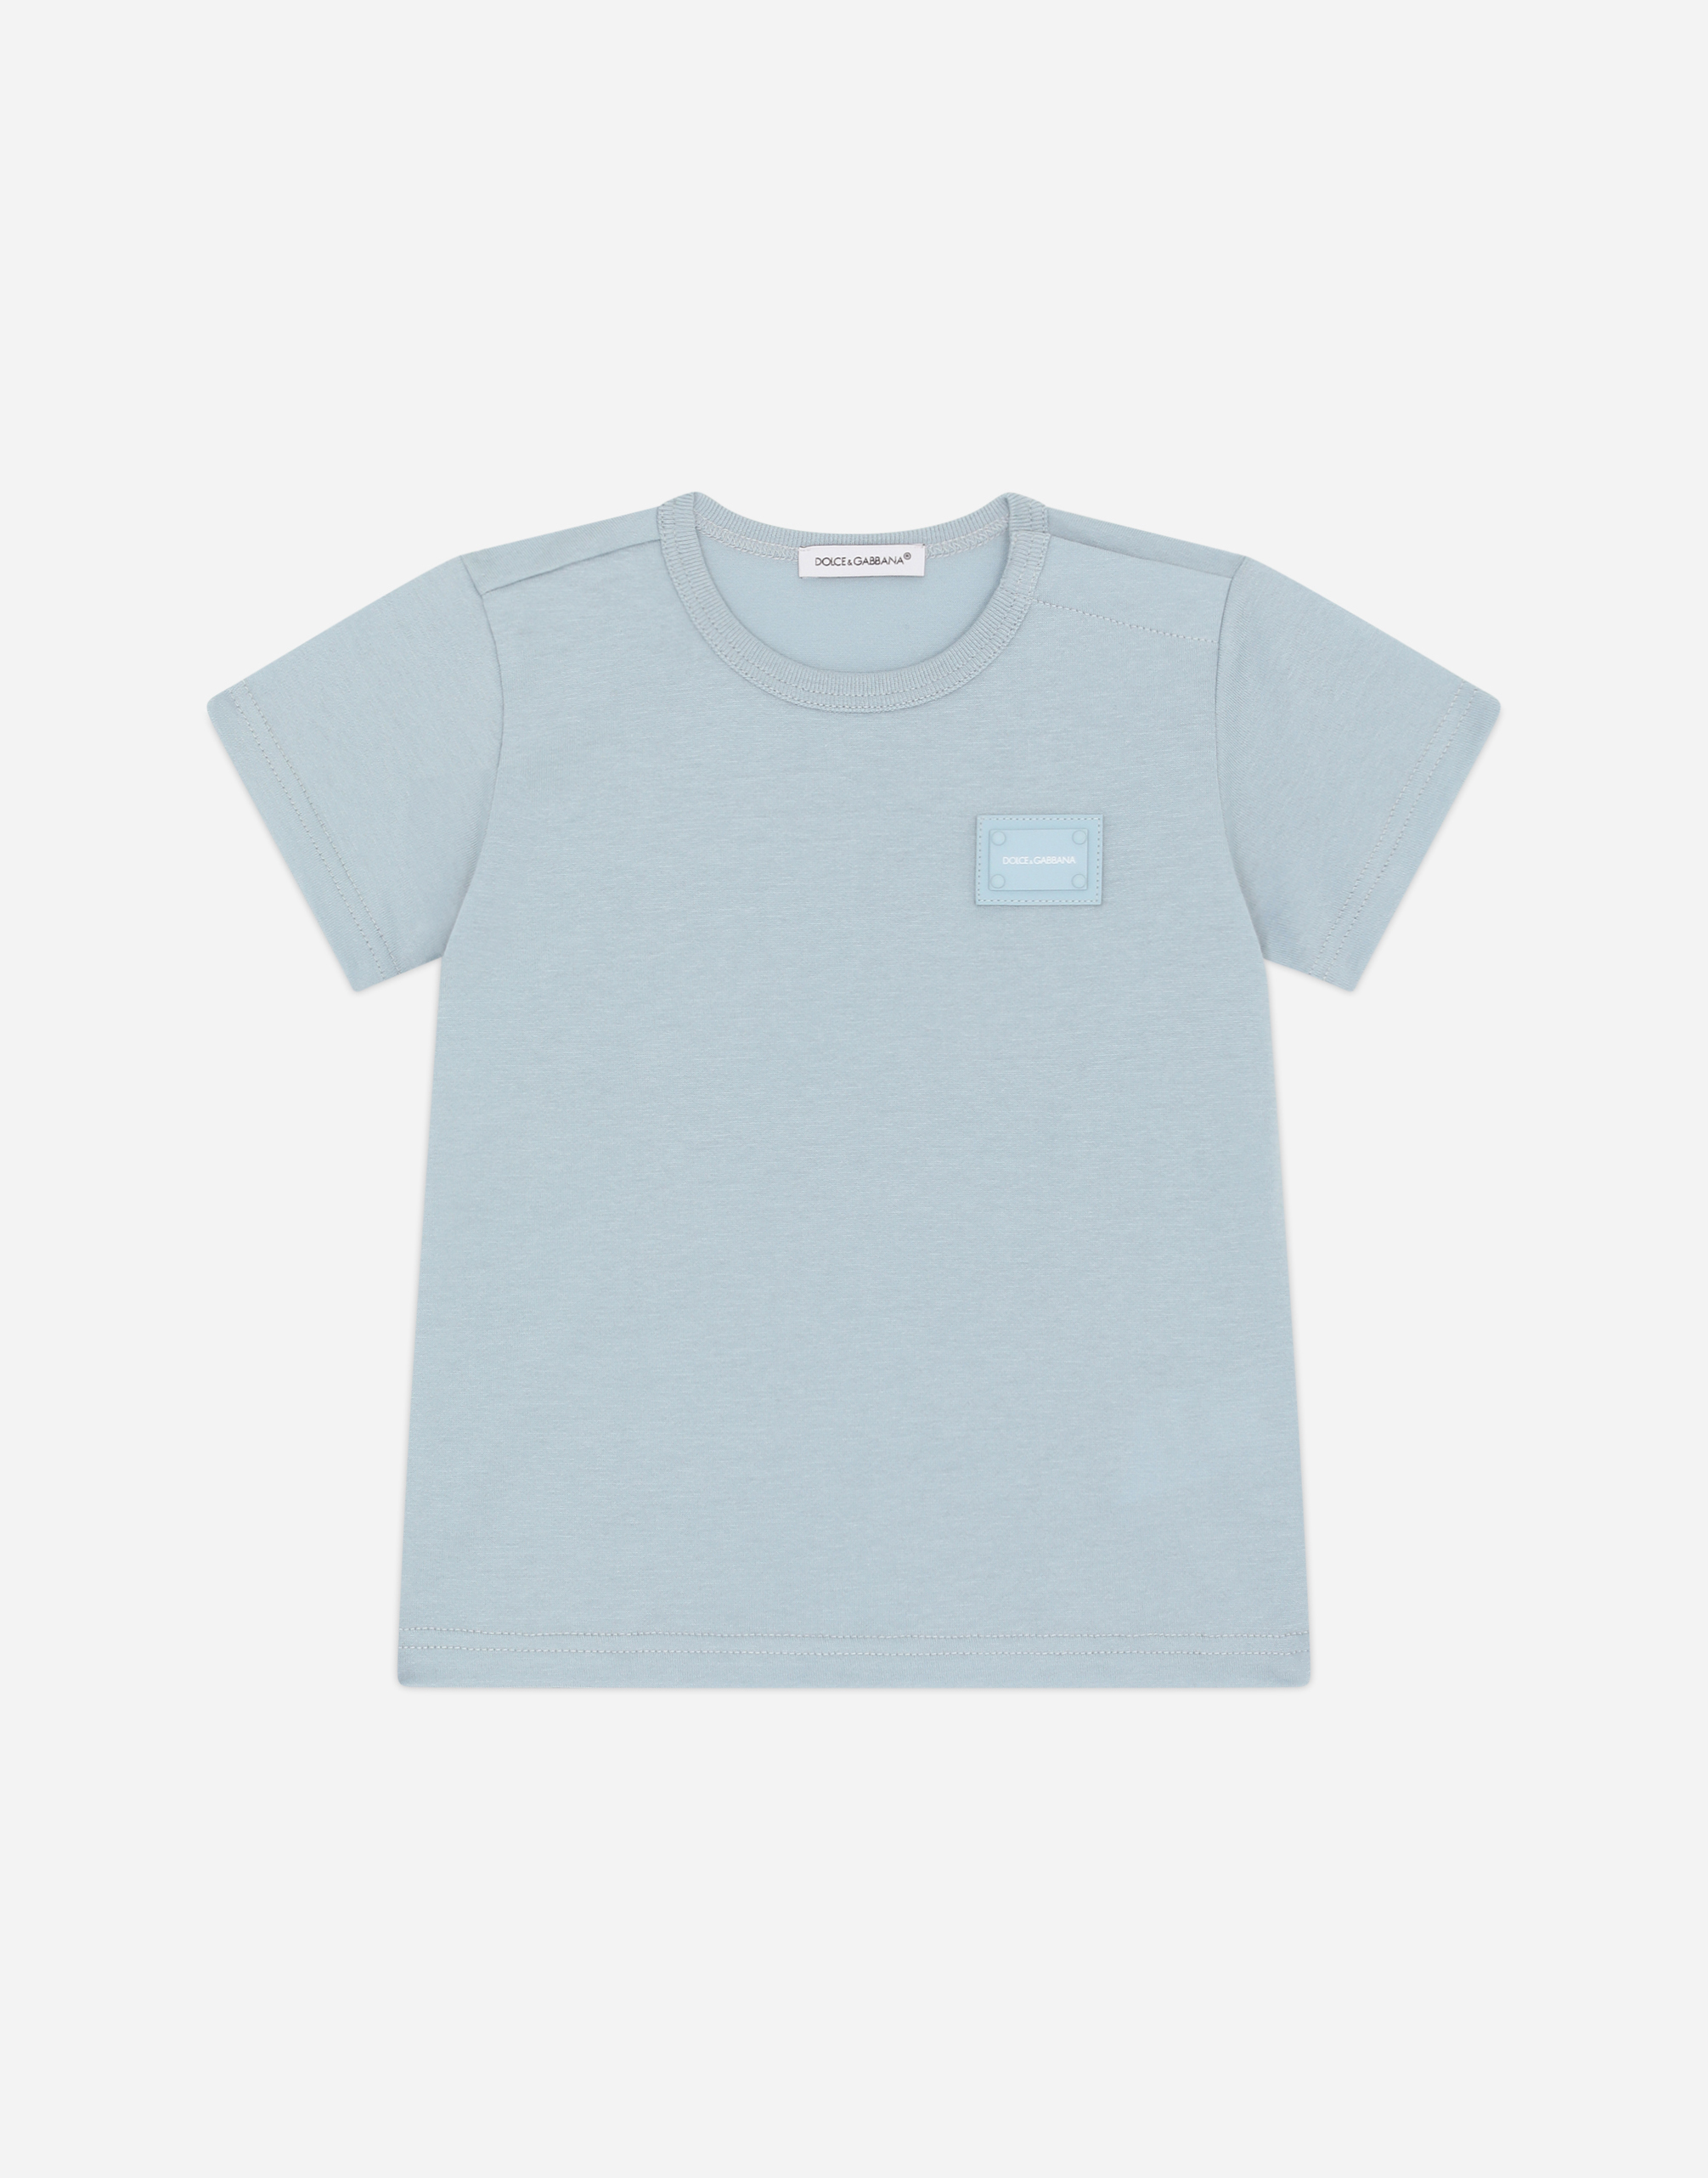 Jersey t-shirt with plate in Azure